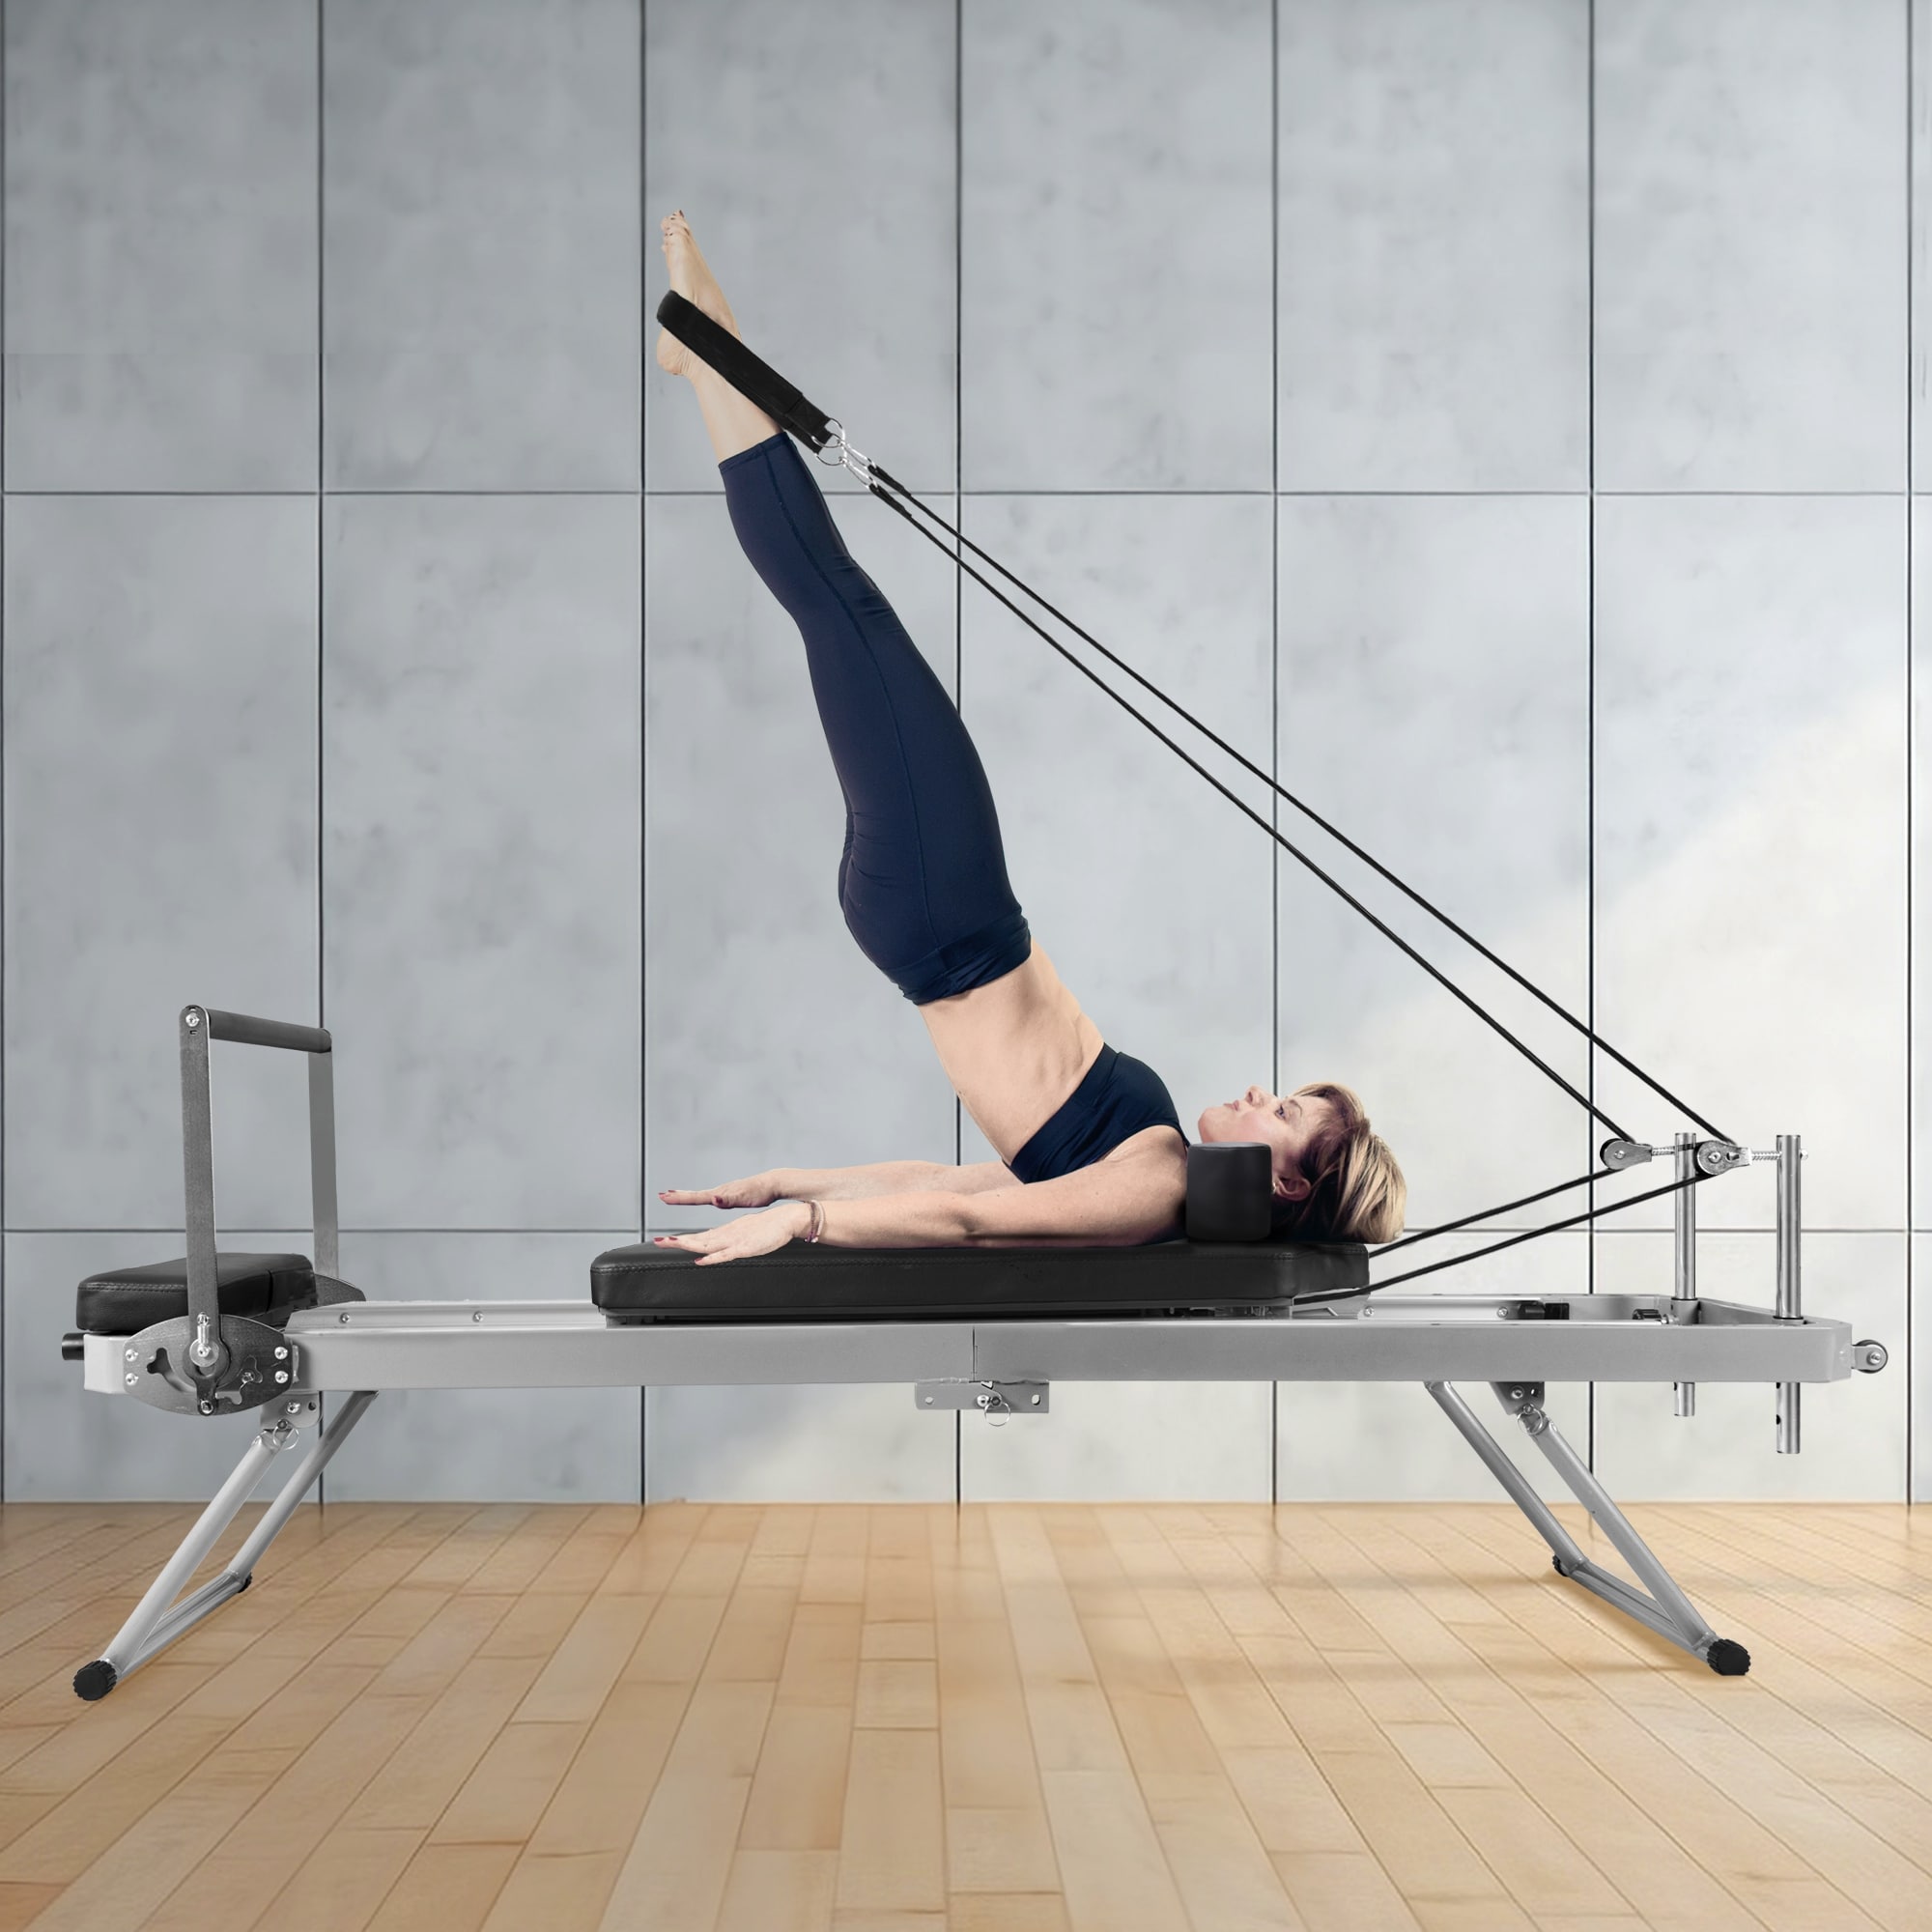 https://ak1.ostkcdn.com/images/products/is/images/direct/942b2c892e5e25ed7bb2e593ddcedc4978dce75d/ZENOVA-Pilates-Reformer%EF%BC%8CFoldable-Pilates-Reformer-Machine-for-Home-and-Gym-Use-to-Balanced-Body.jpg